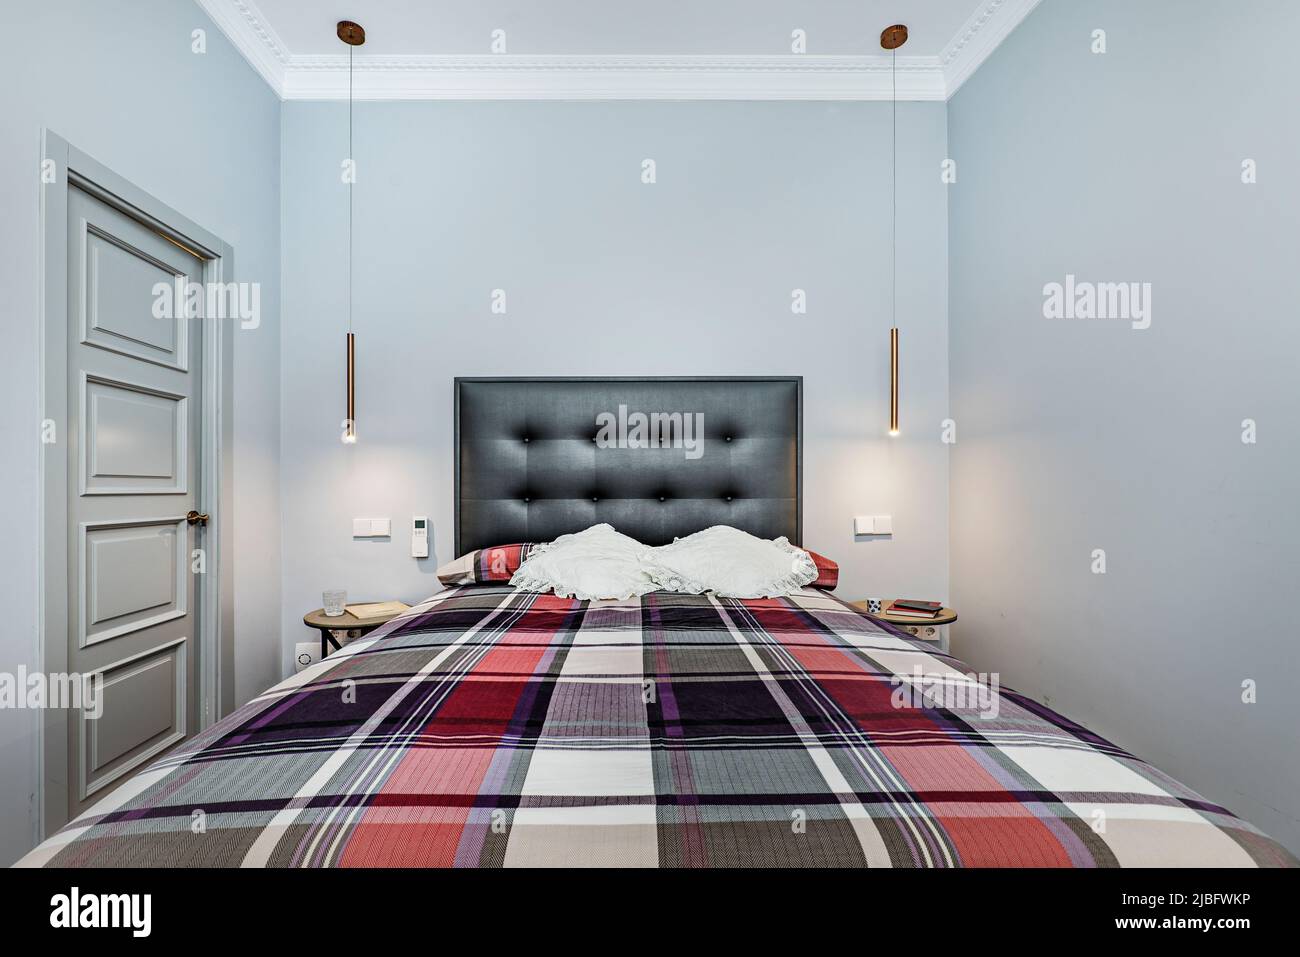 Nicely decorated double bedroom with bright fris fabric upholstered headboard, colorful square bedspread and gray wooden door to an en-suite bathroom Stock Photo